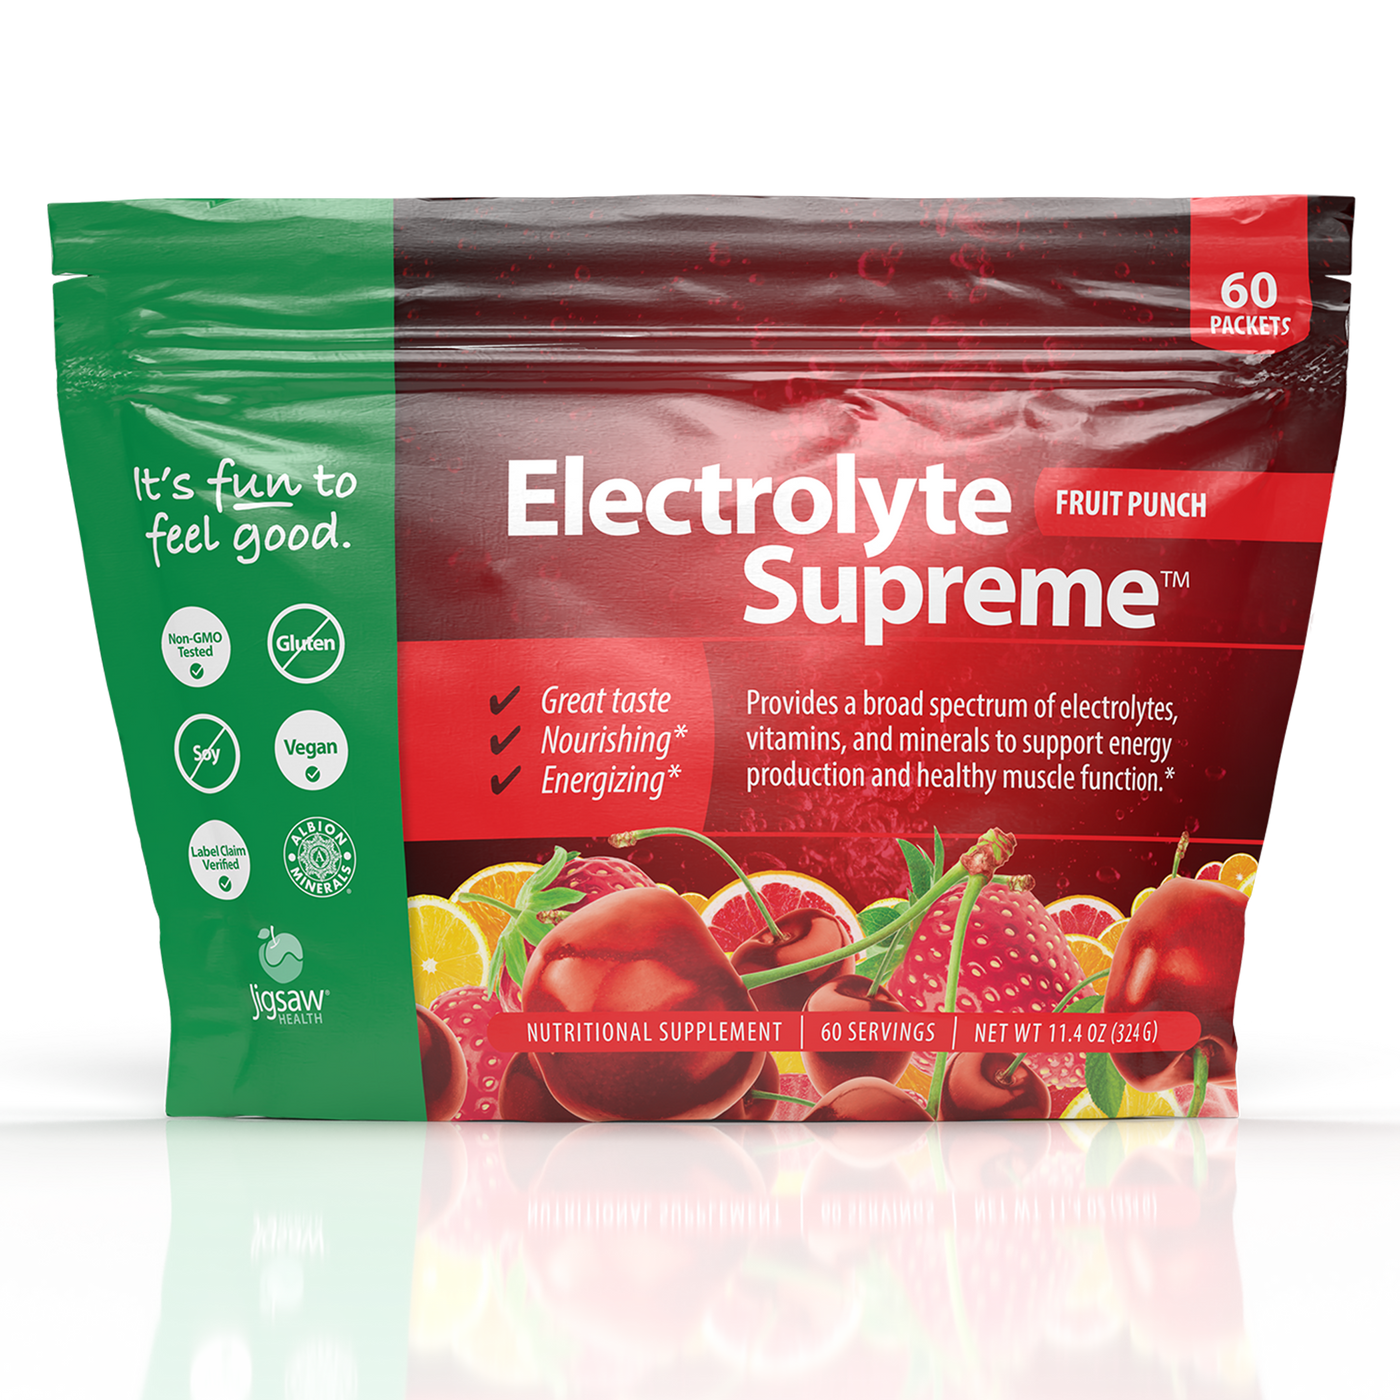 Electrolyte Sup Fruit Punch 60 packets Curated Wellness